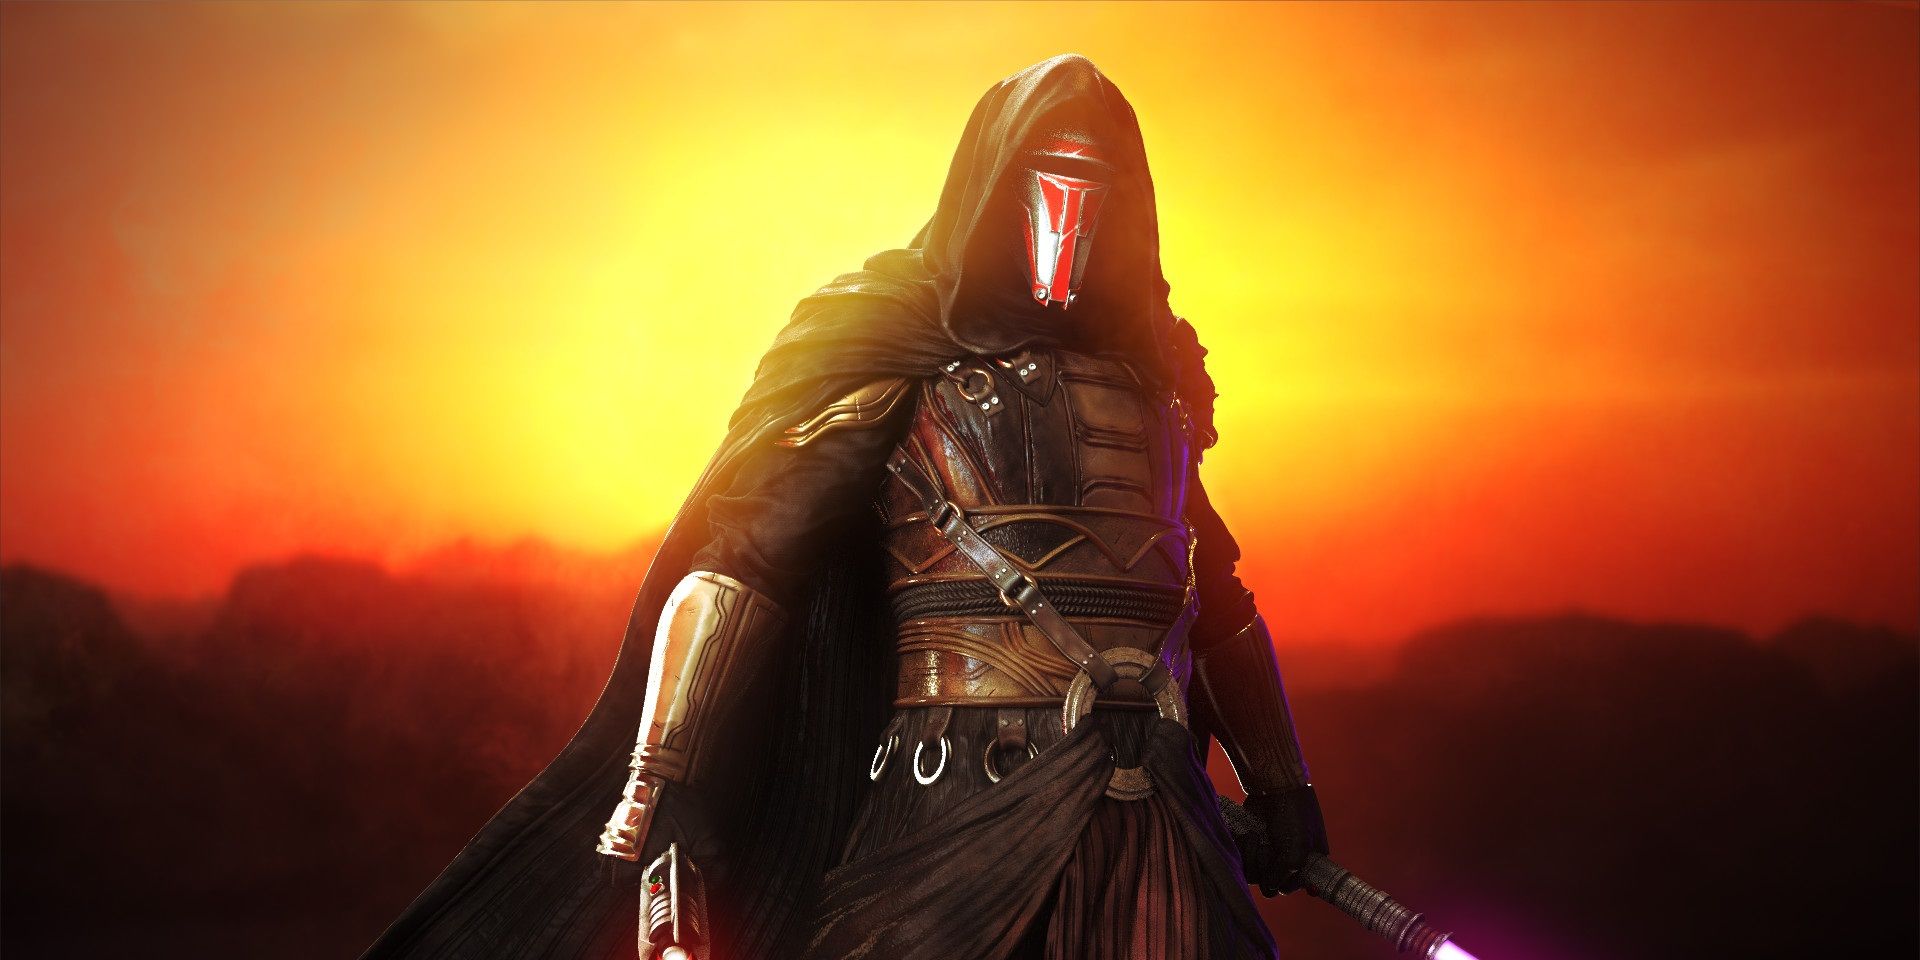 Darth Revan against a sunset in Star Wars: Knights of the Old Republic